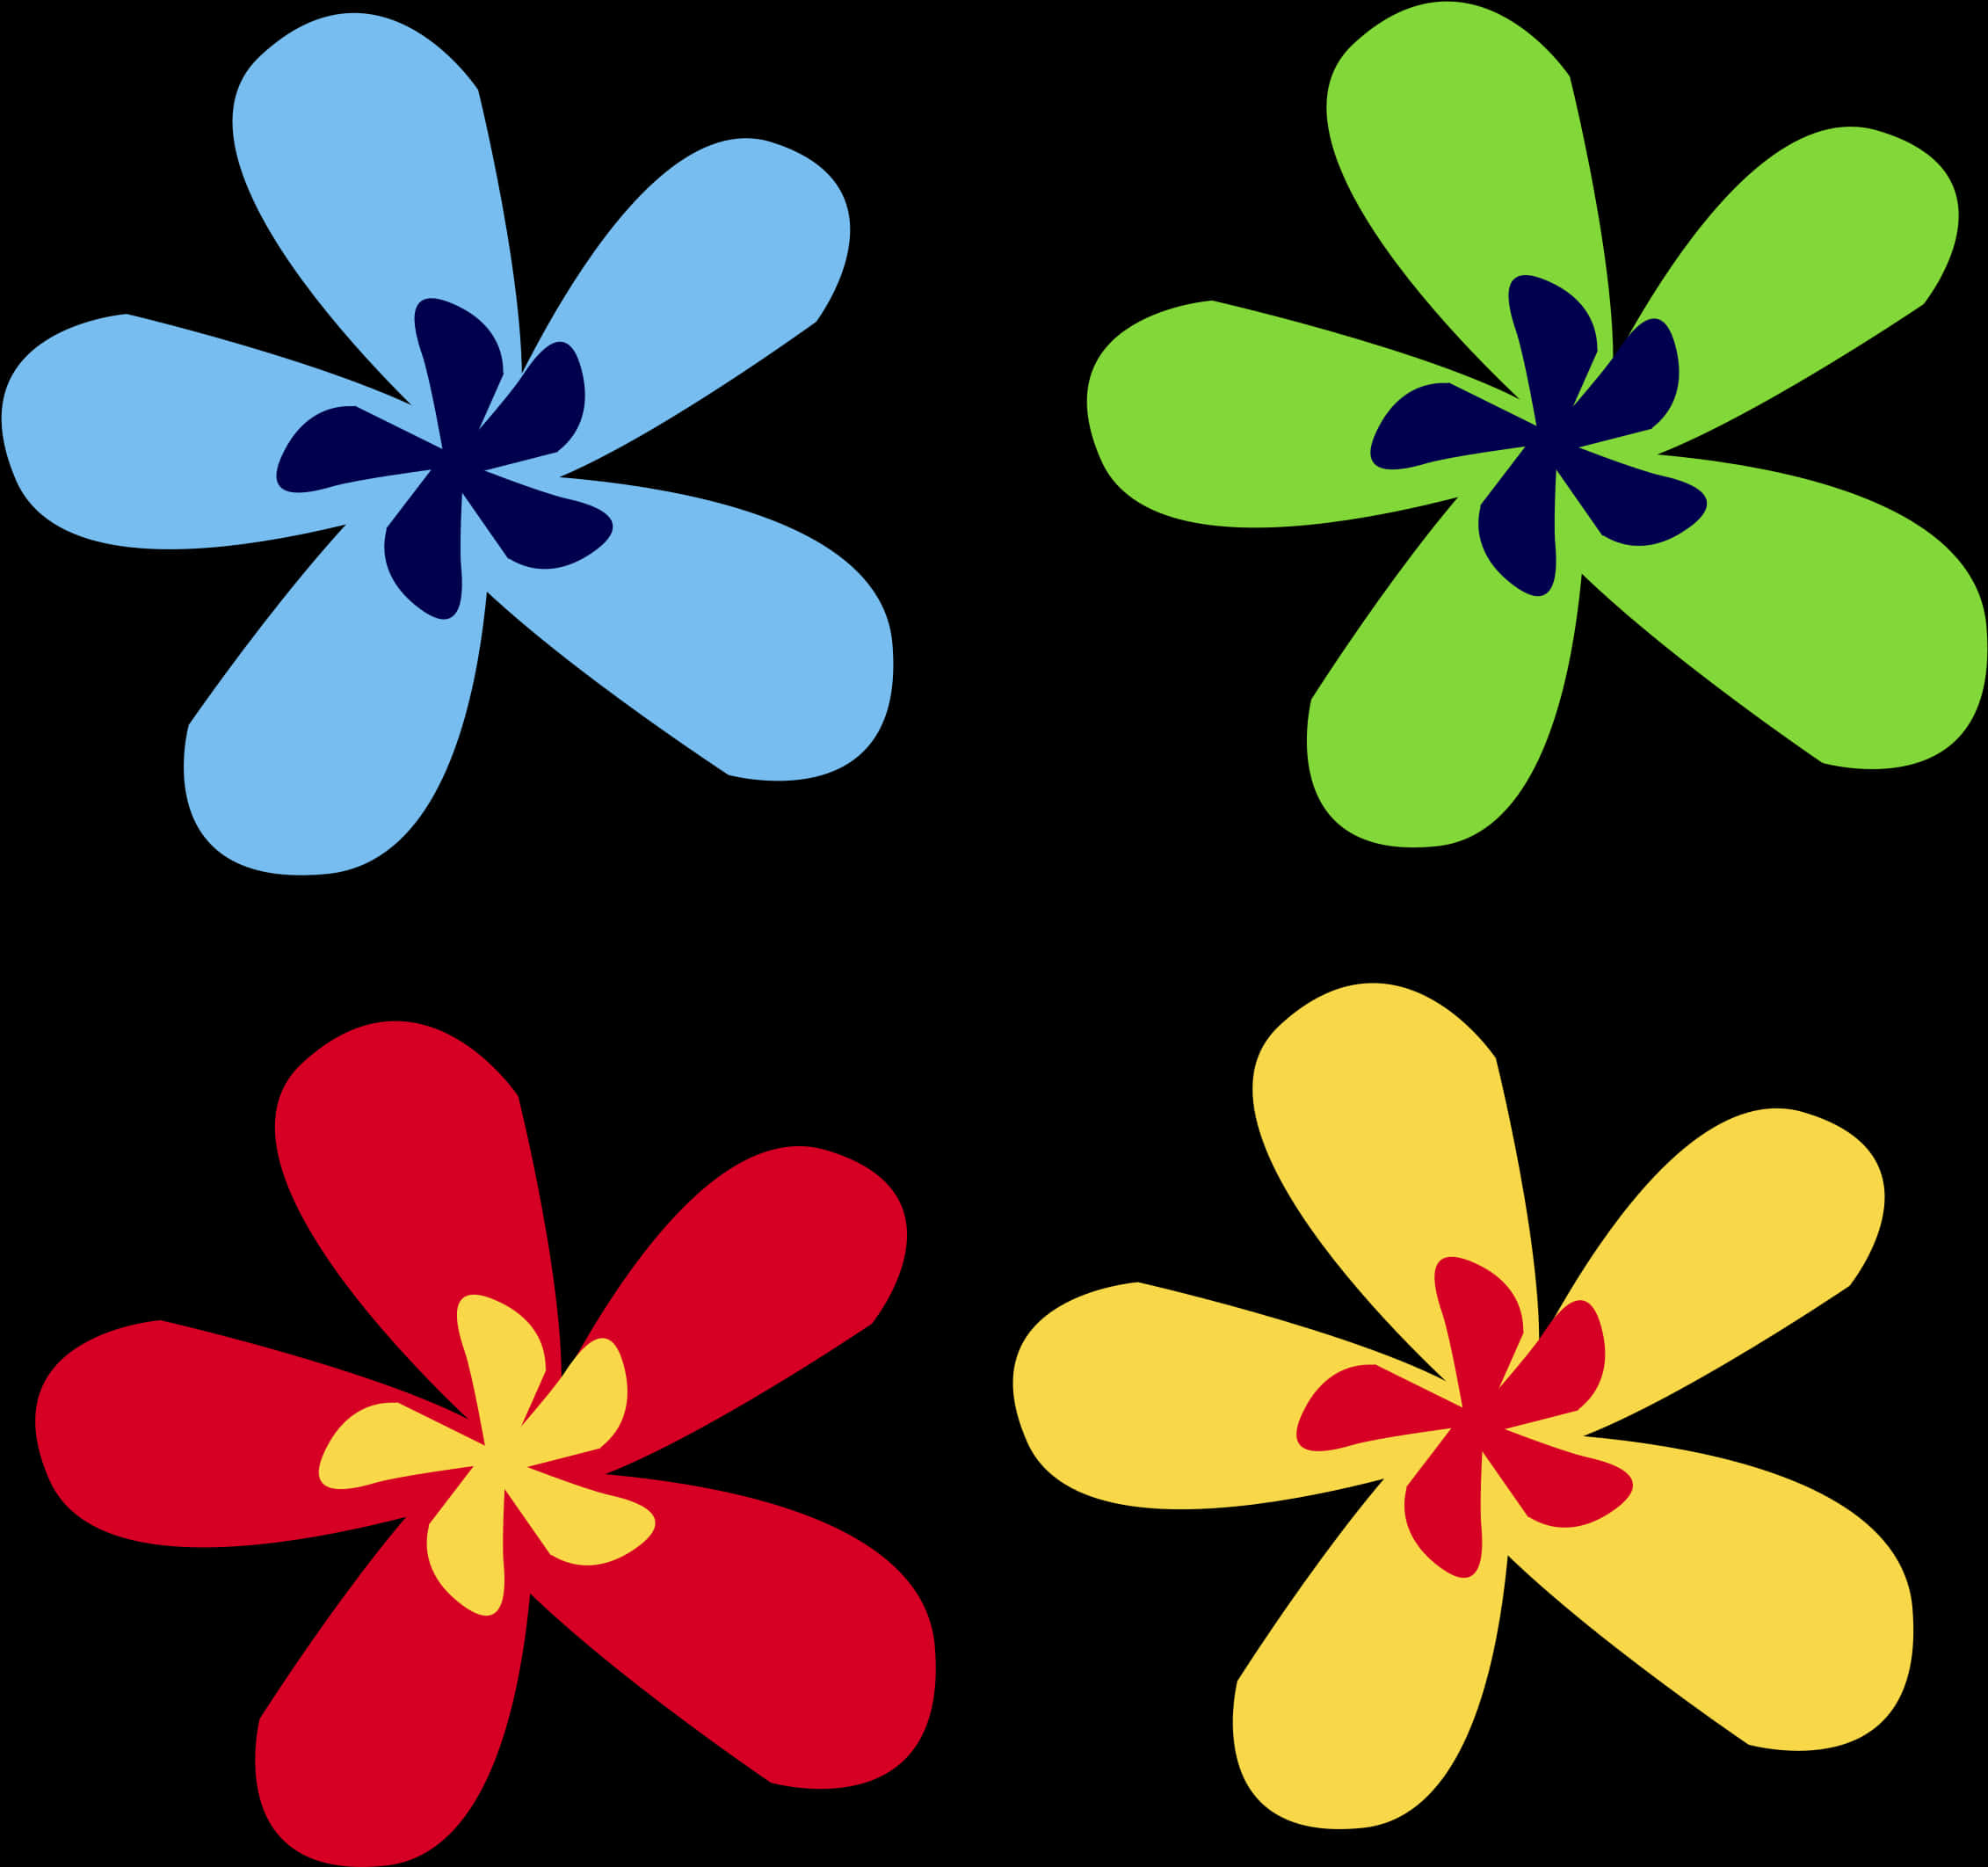 Colorful Abstract Flower Vector Illustration PNG